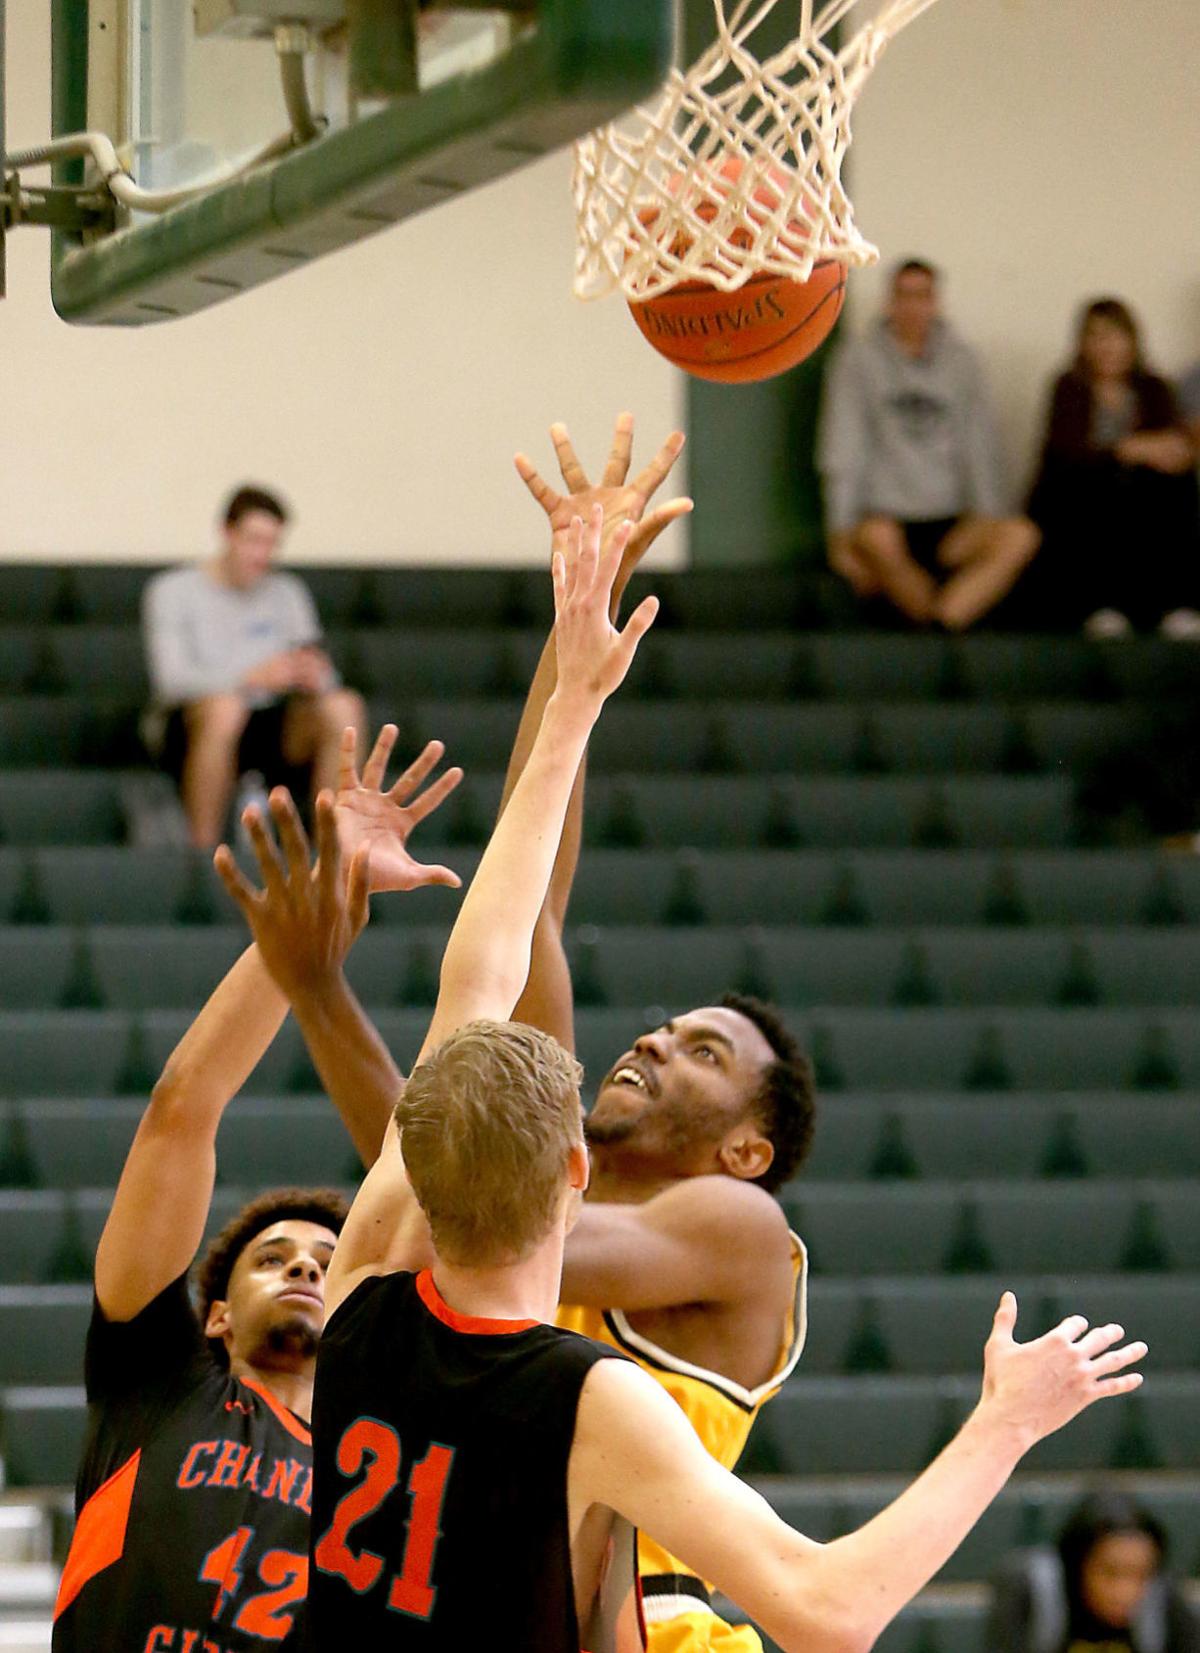 CAC men win 3rd straight ACCAC game